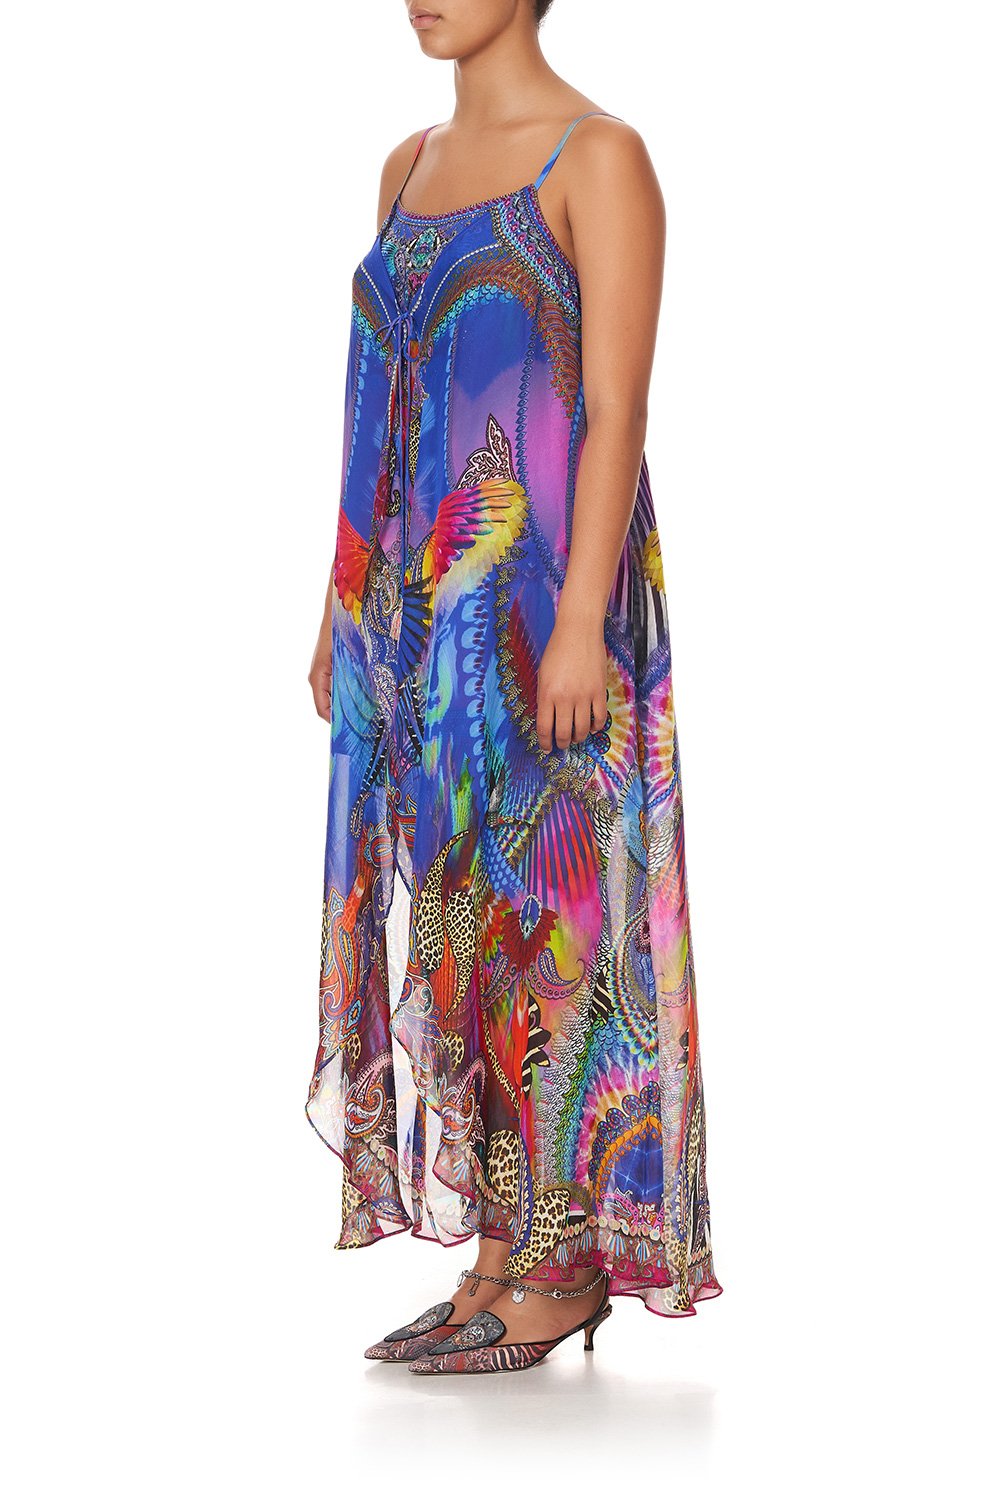 MINI DRESS WITH LONG OVERLAY PSYCHEDELICA